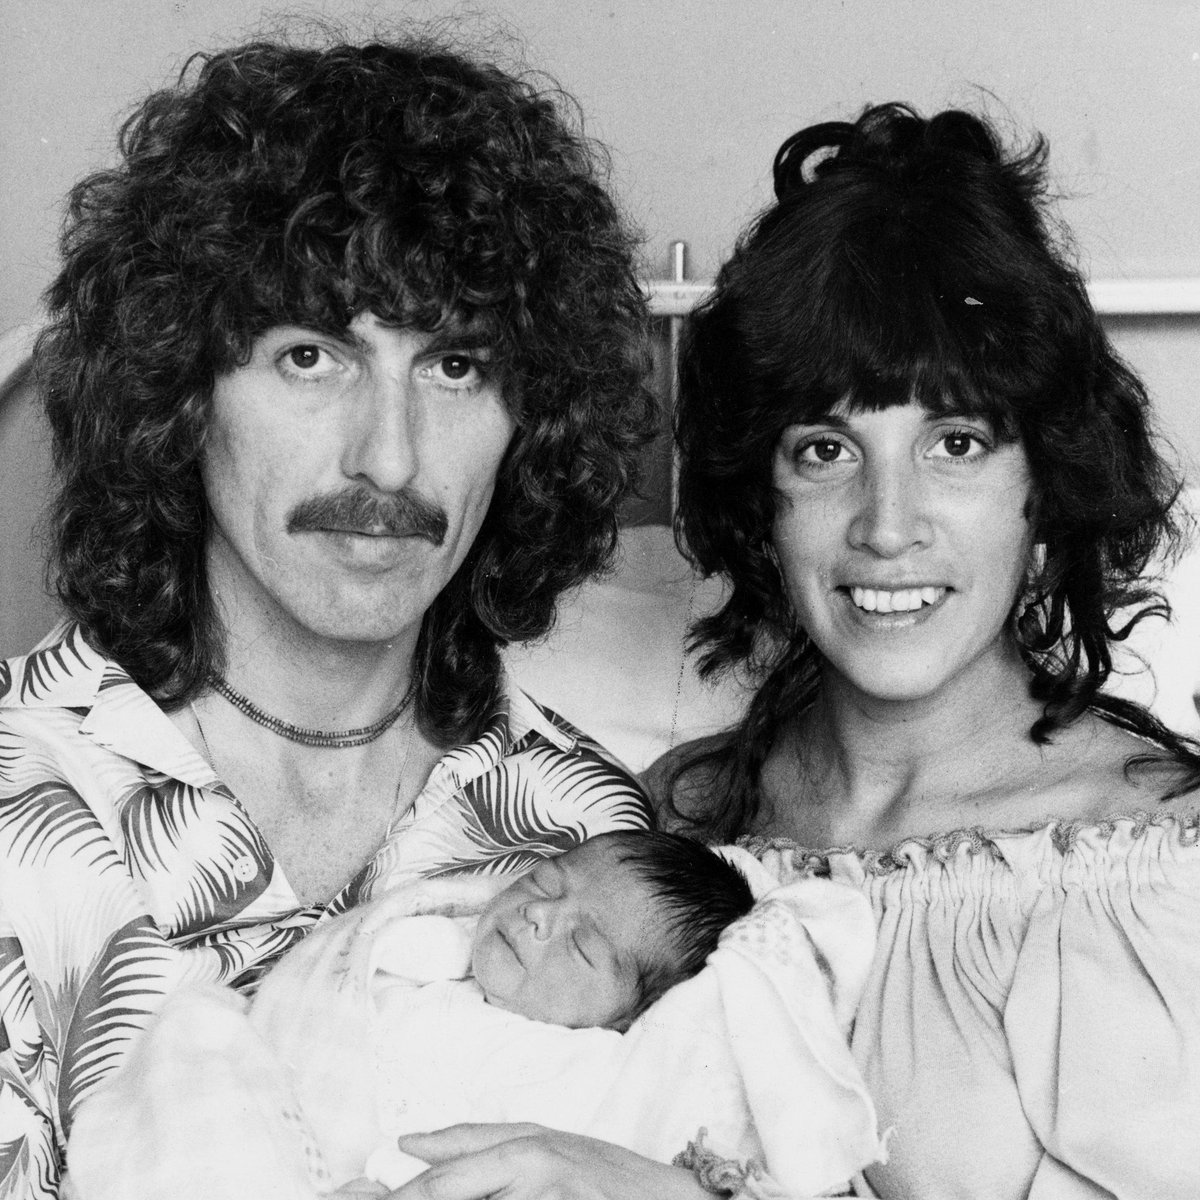 Happy Birthday to Olivia Harrison! 
Seen here with George and their son Dhani. 

#TheBeatles #GeorgeHarrison #oliviaharrison #dhaniharrison #love